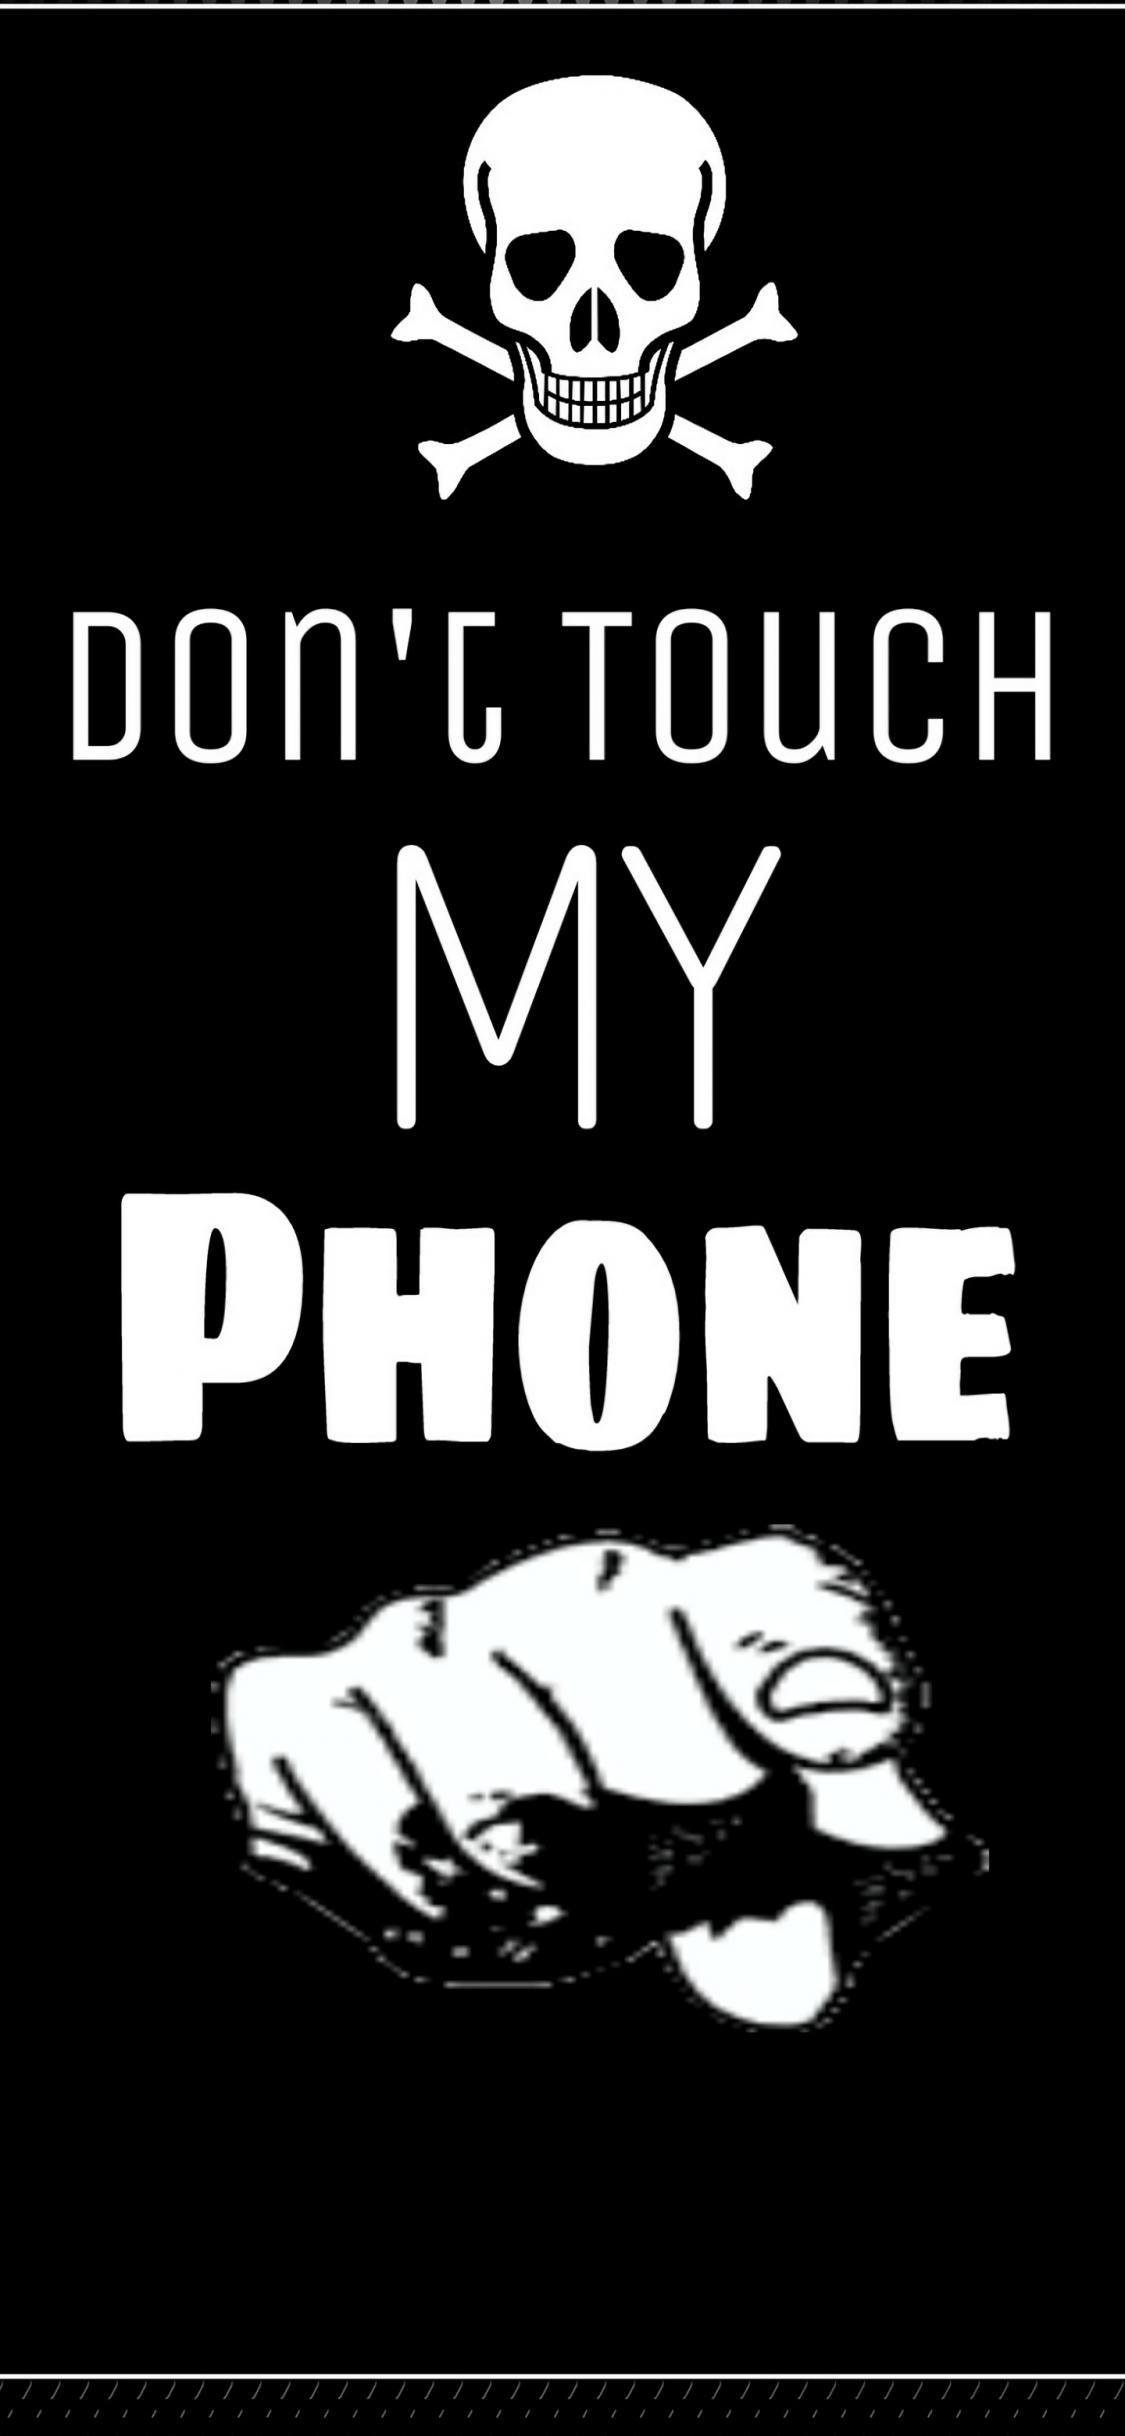 Dont Touch My Phone 4k Wallpaper Download  TechShits